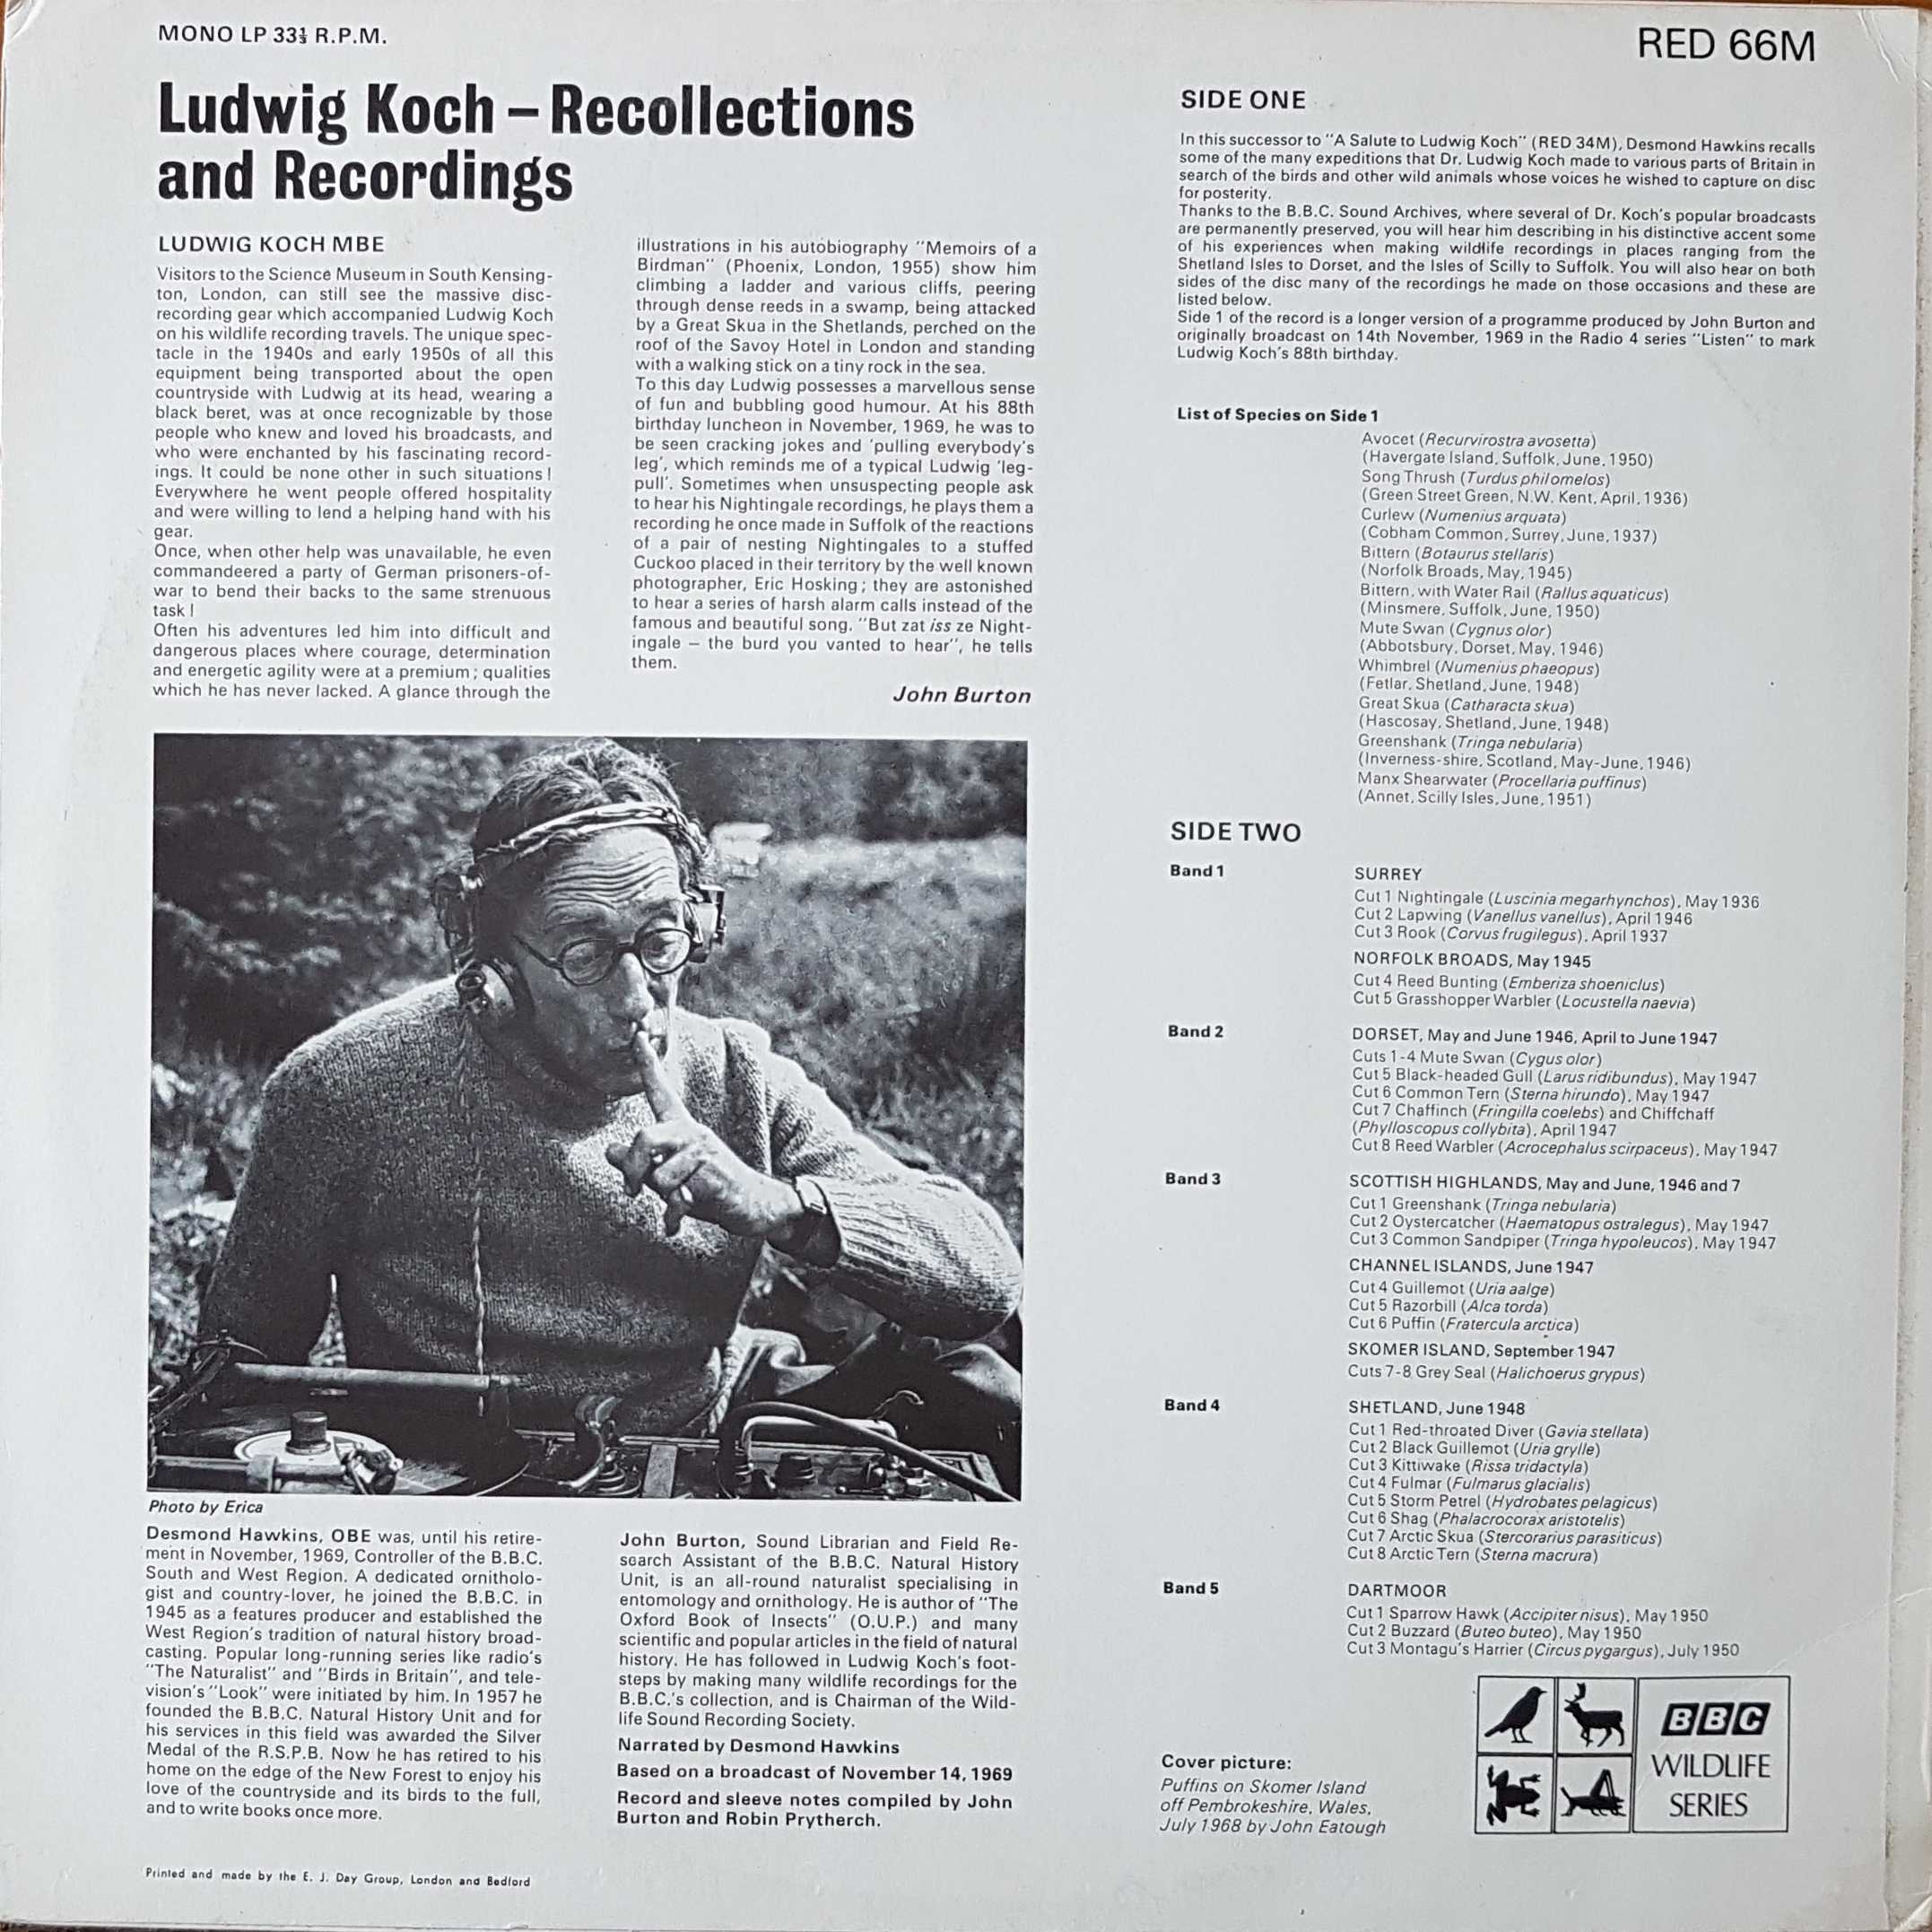 Picture of RED 66 Recollections and recordings by artist Ludwig Koch from the BBC records and Tapes library